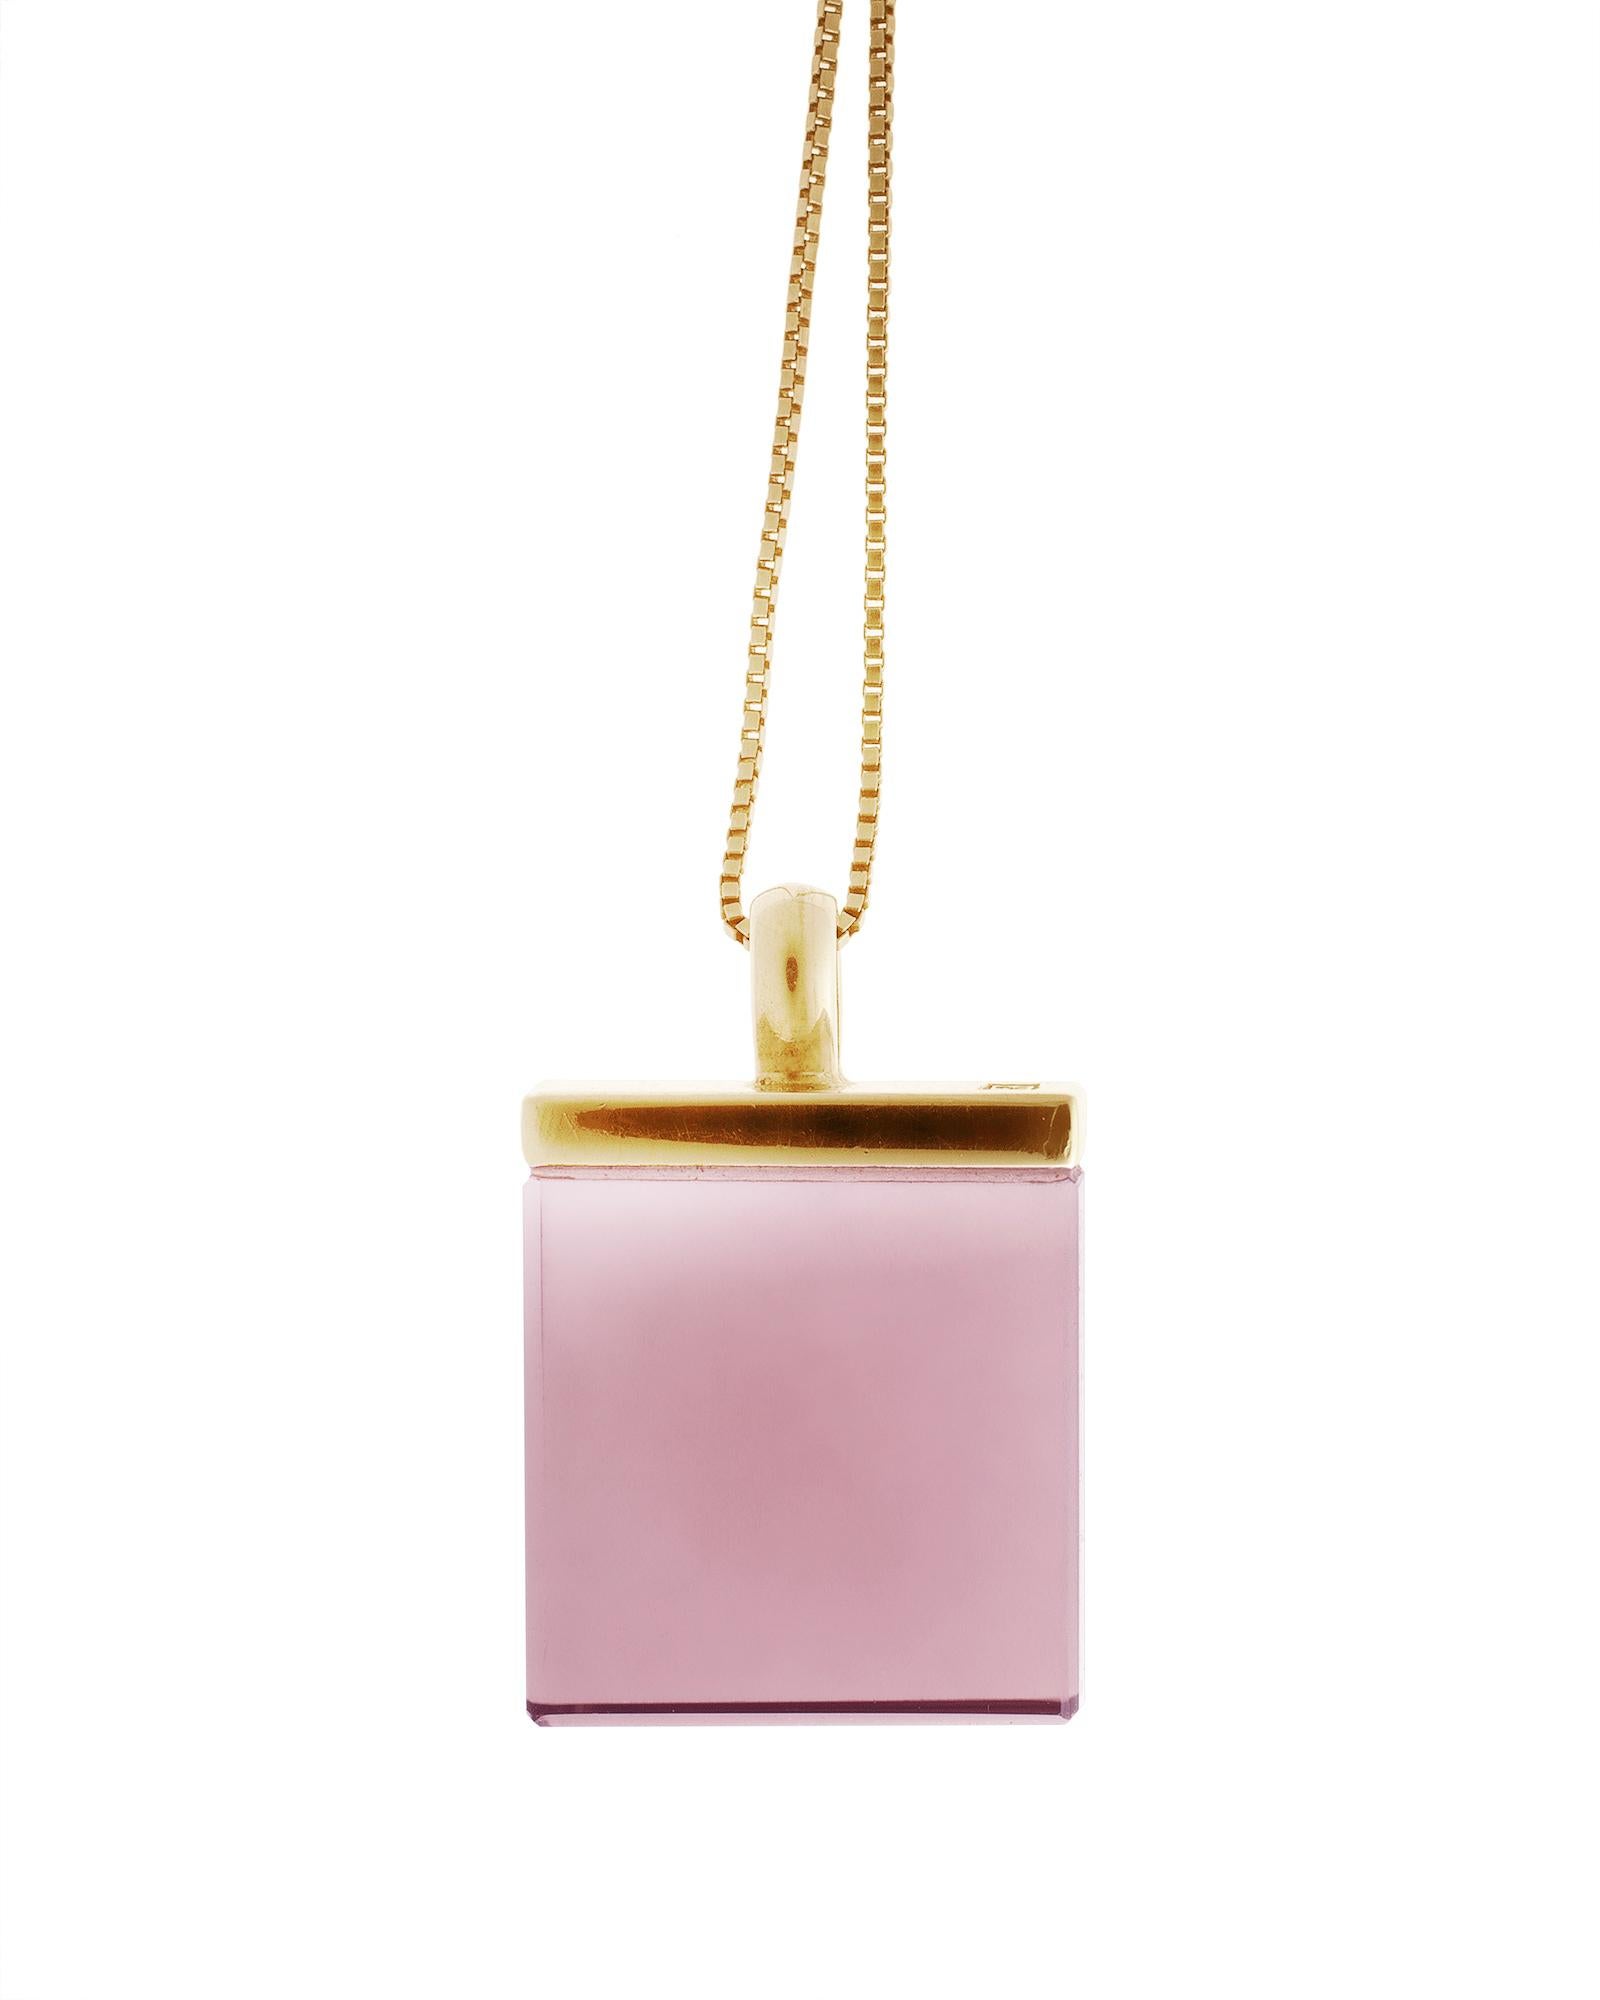 This contemporary pendant necklace features a 15x15x8 mm natural untreated pink tourmaline, specially cut for the artist by Germany's oldest gem company, which has been in the market since the 19th century. The pendant is crafted from 18 karat